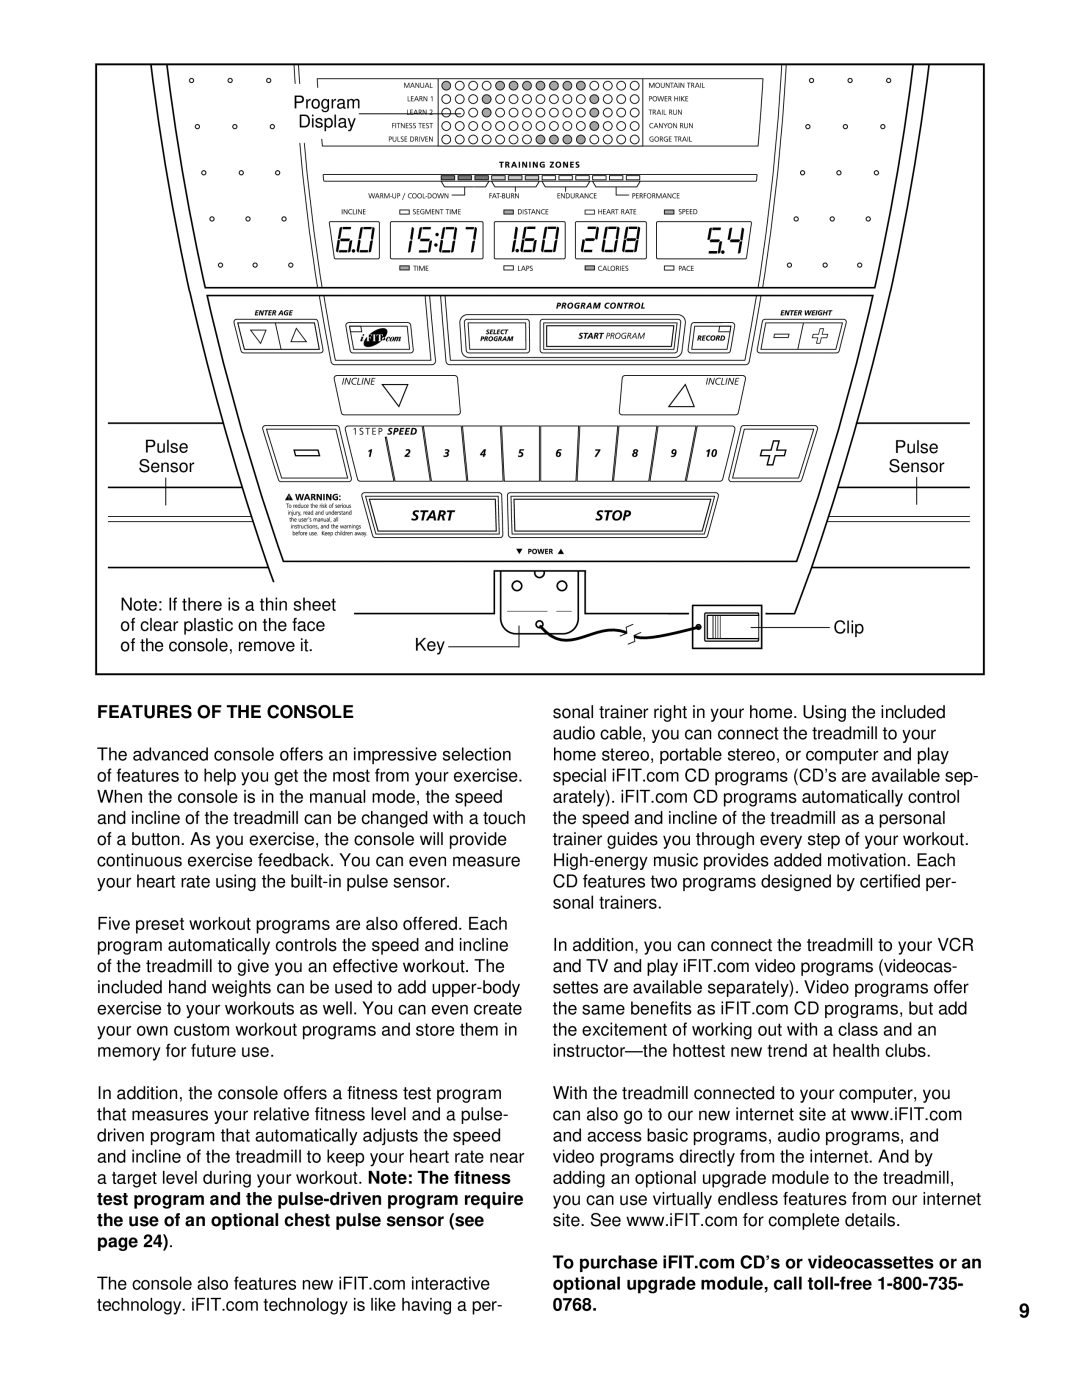 NordicTrack NTTL11994 user manual Features of the Console, 0768.9 